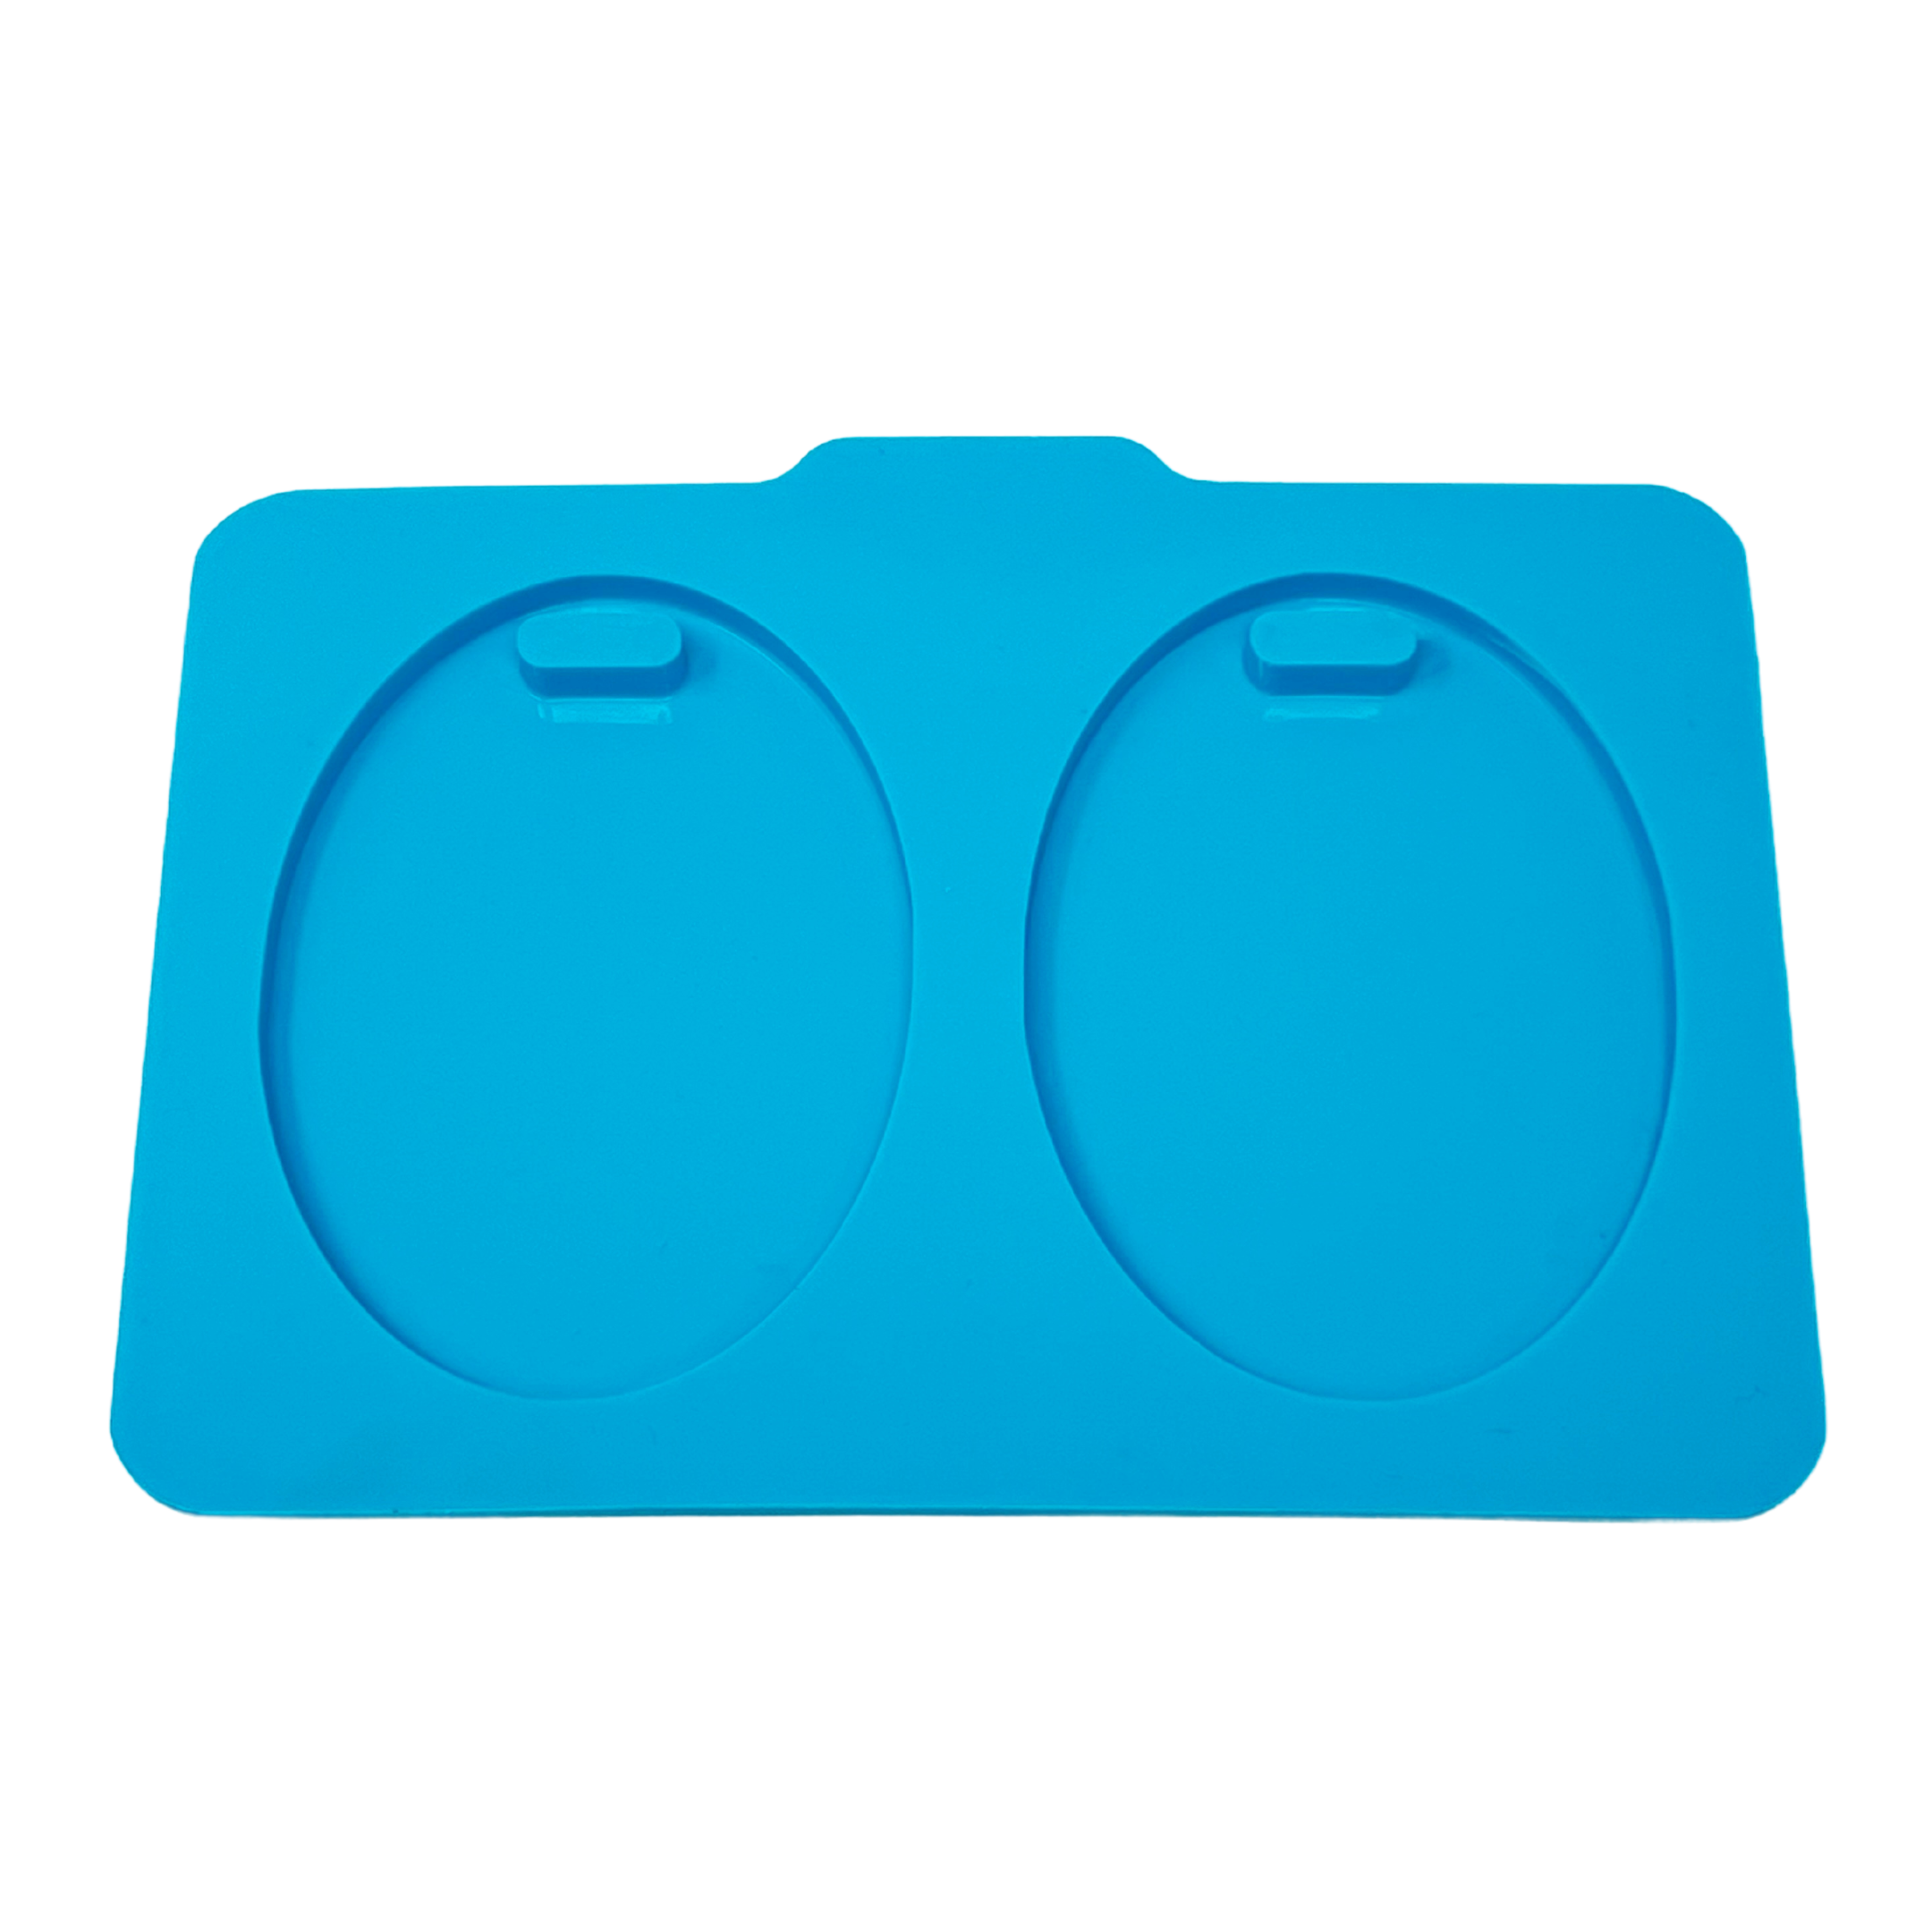 Oval Bag Tag Palette Mould - The Mould Story